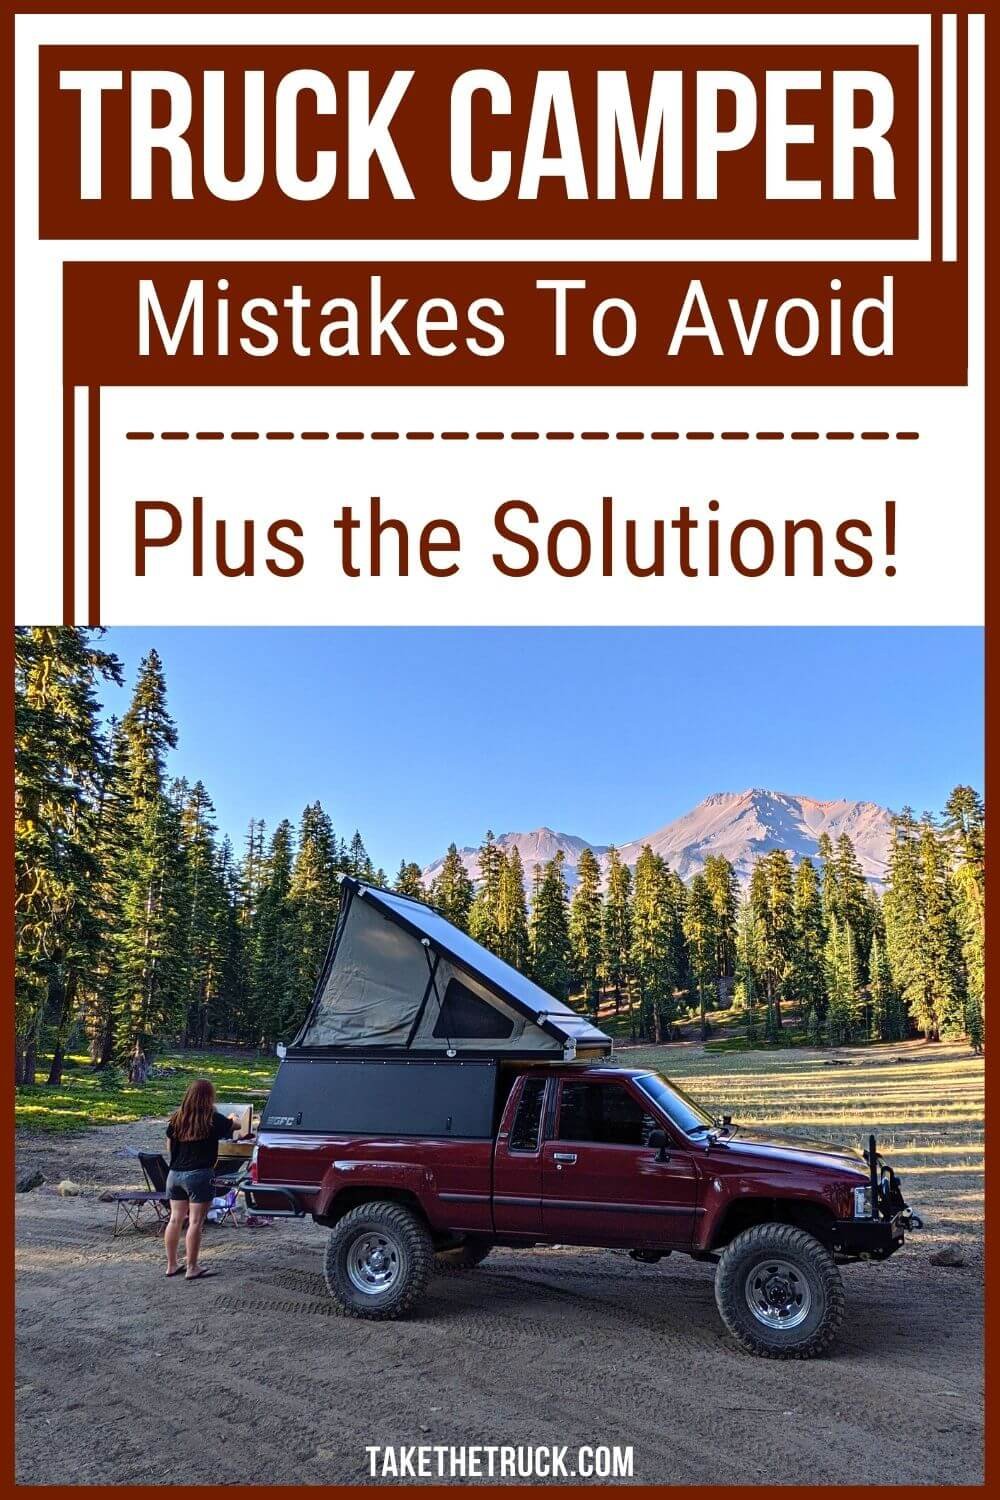 Ready to build your own truck bed camper? Read this post first for 12 common mistakes you’ll want to avoid in your diy truck bed camper build. Start truck topper camping like a pro!